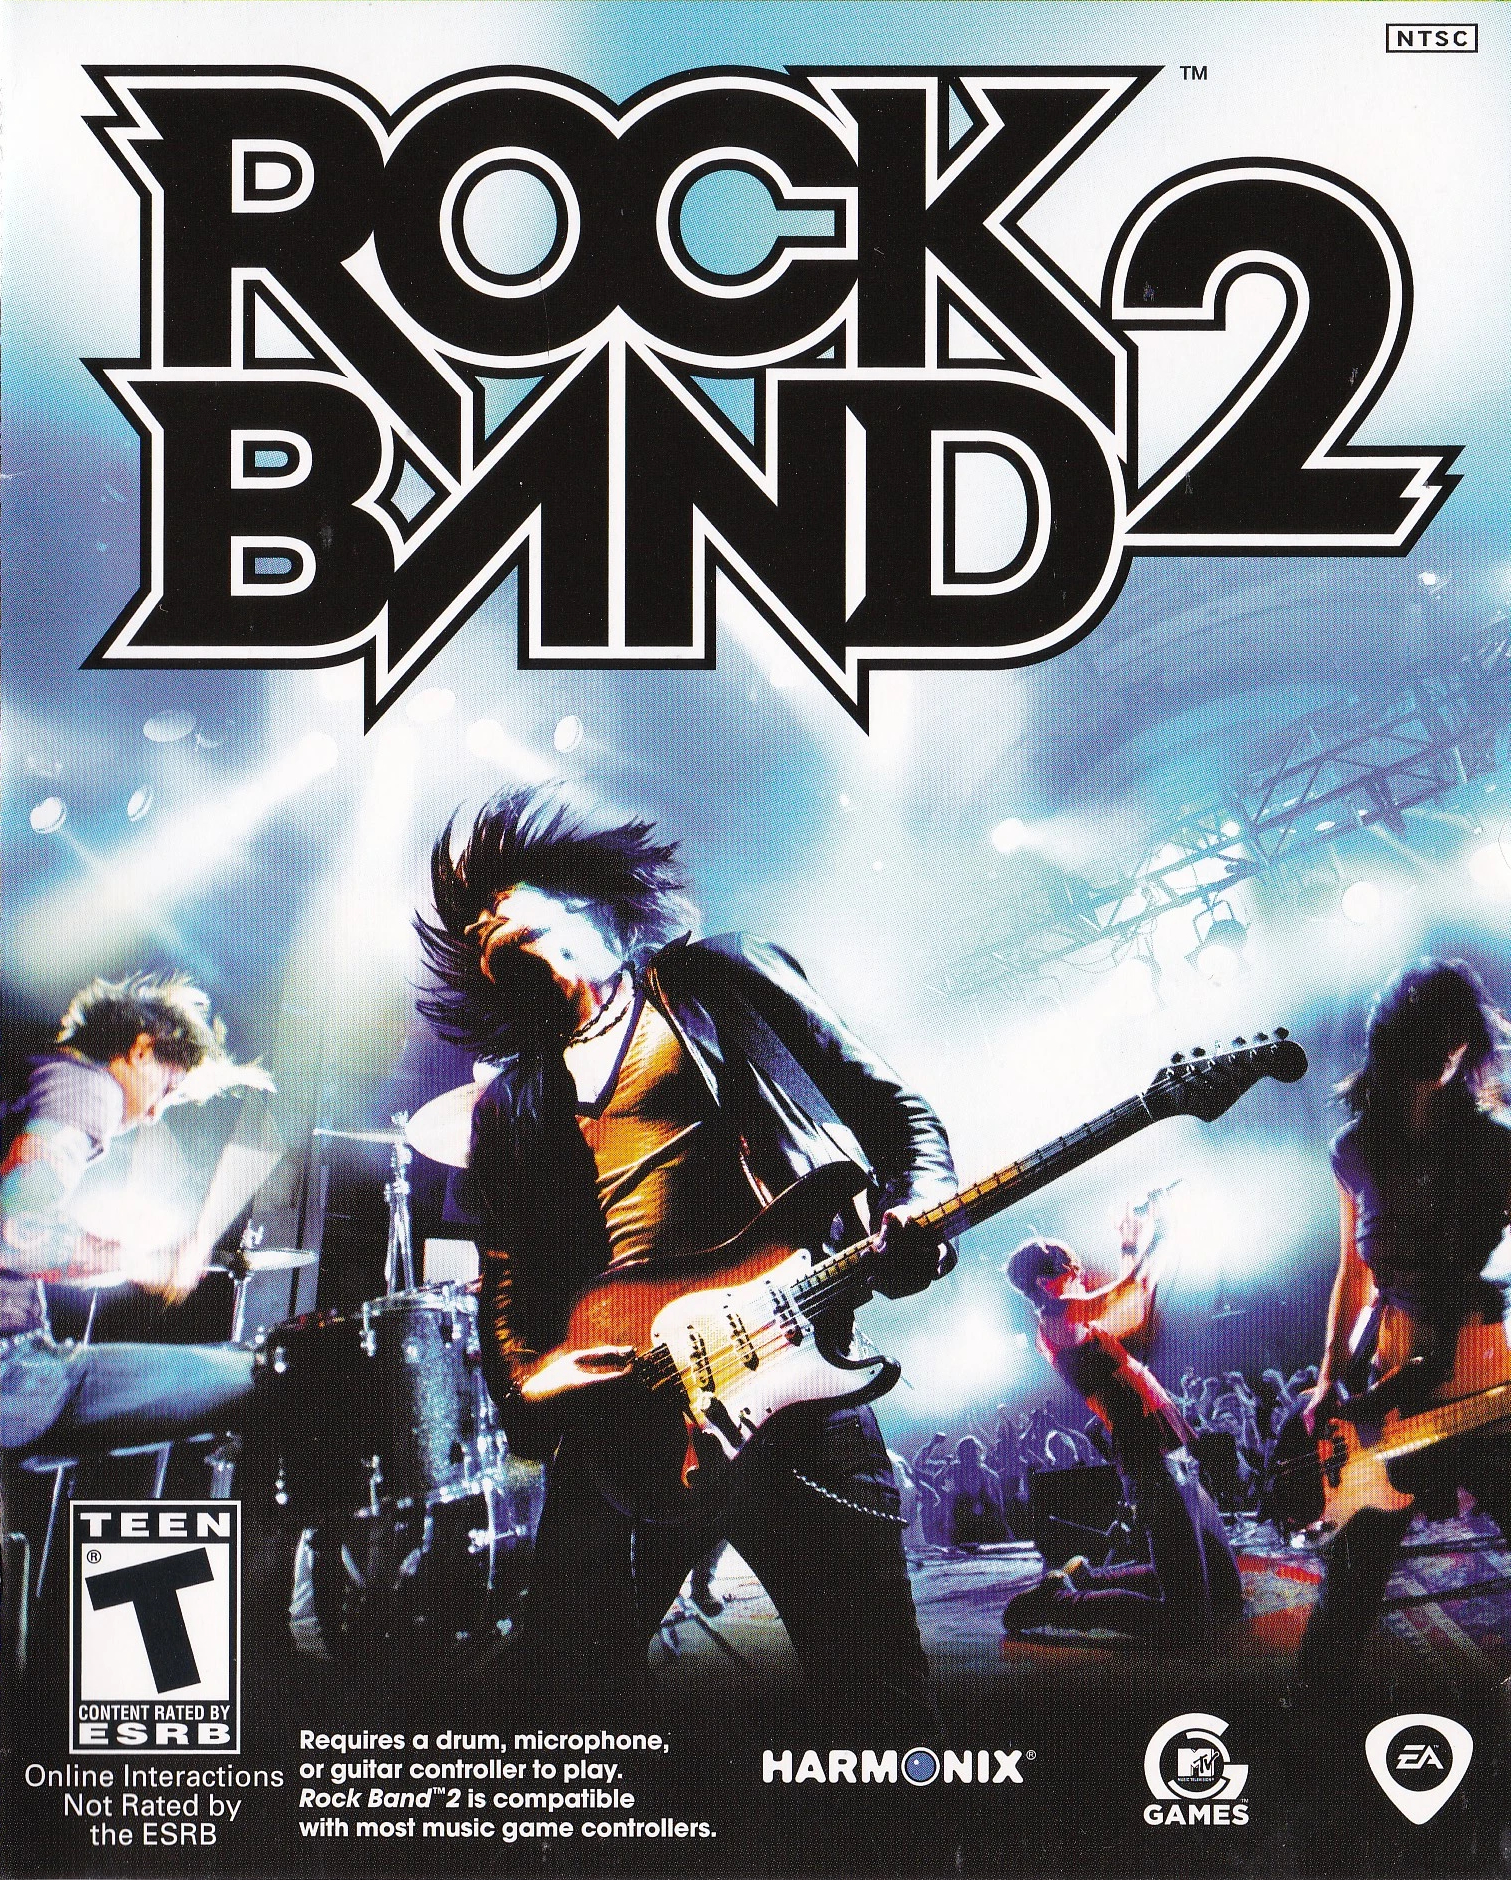 rock band 3 band in a box